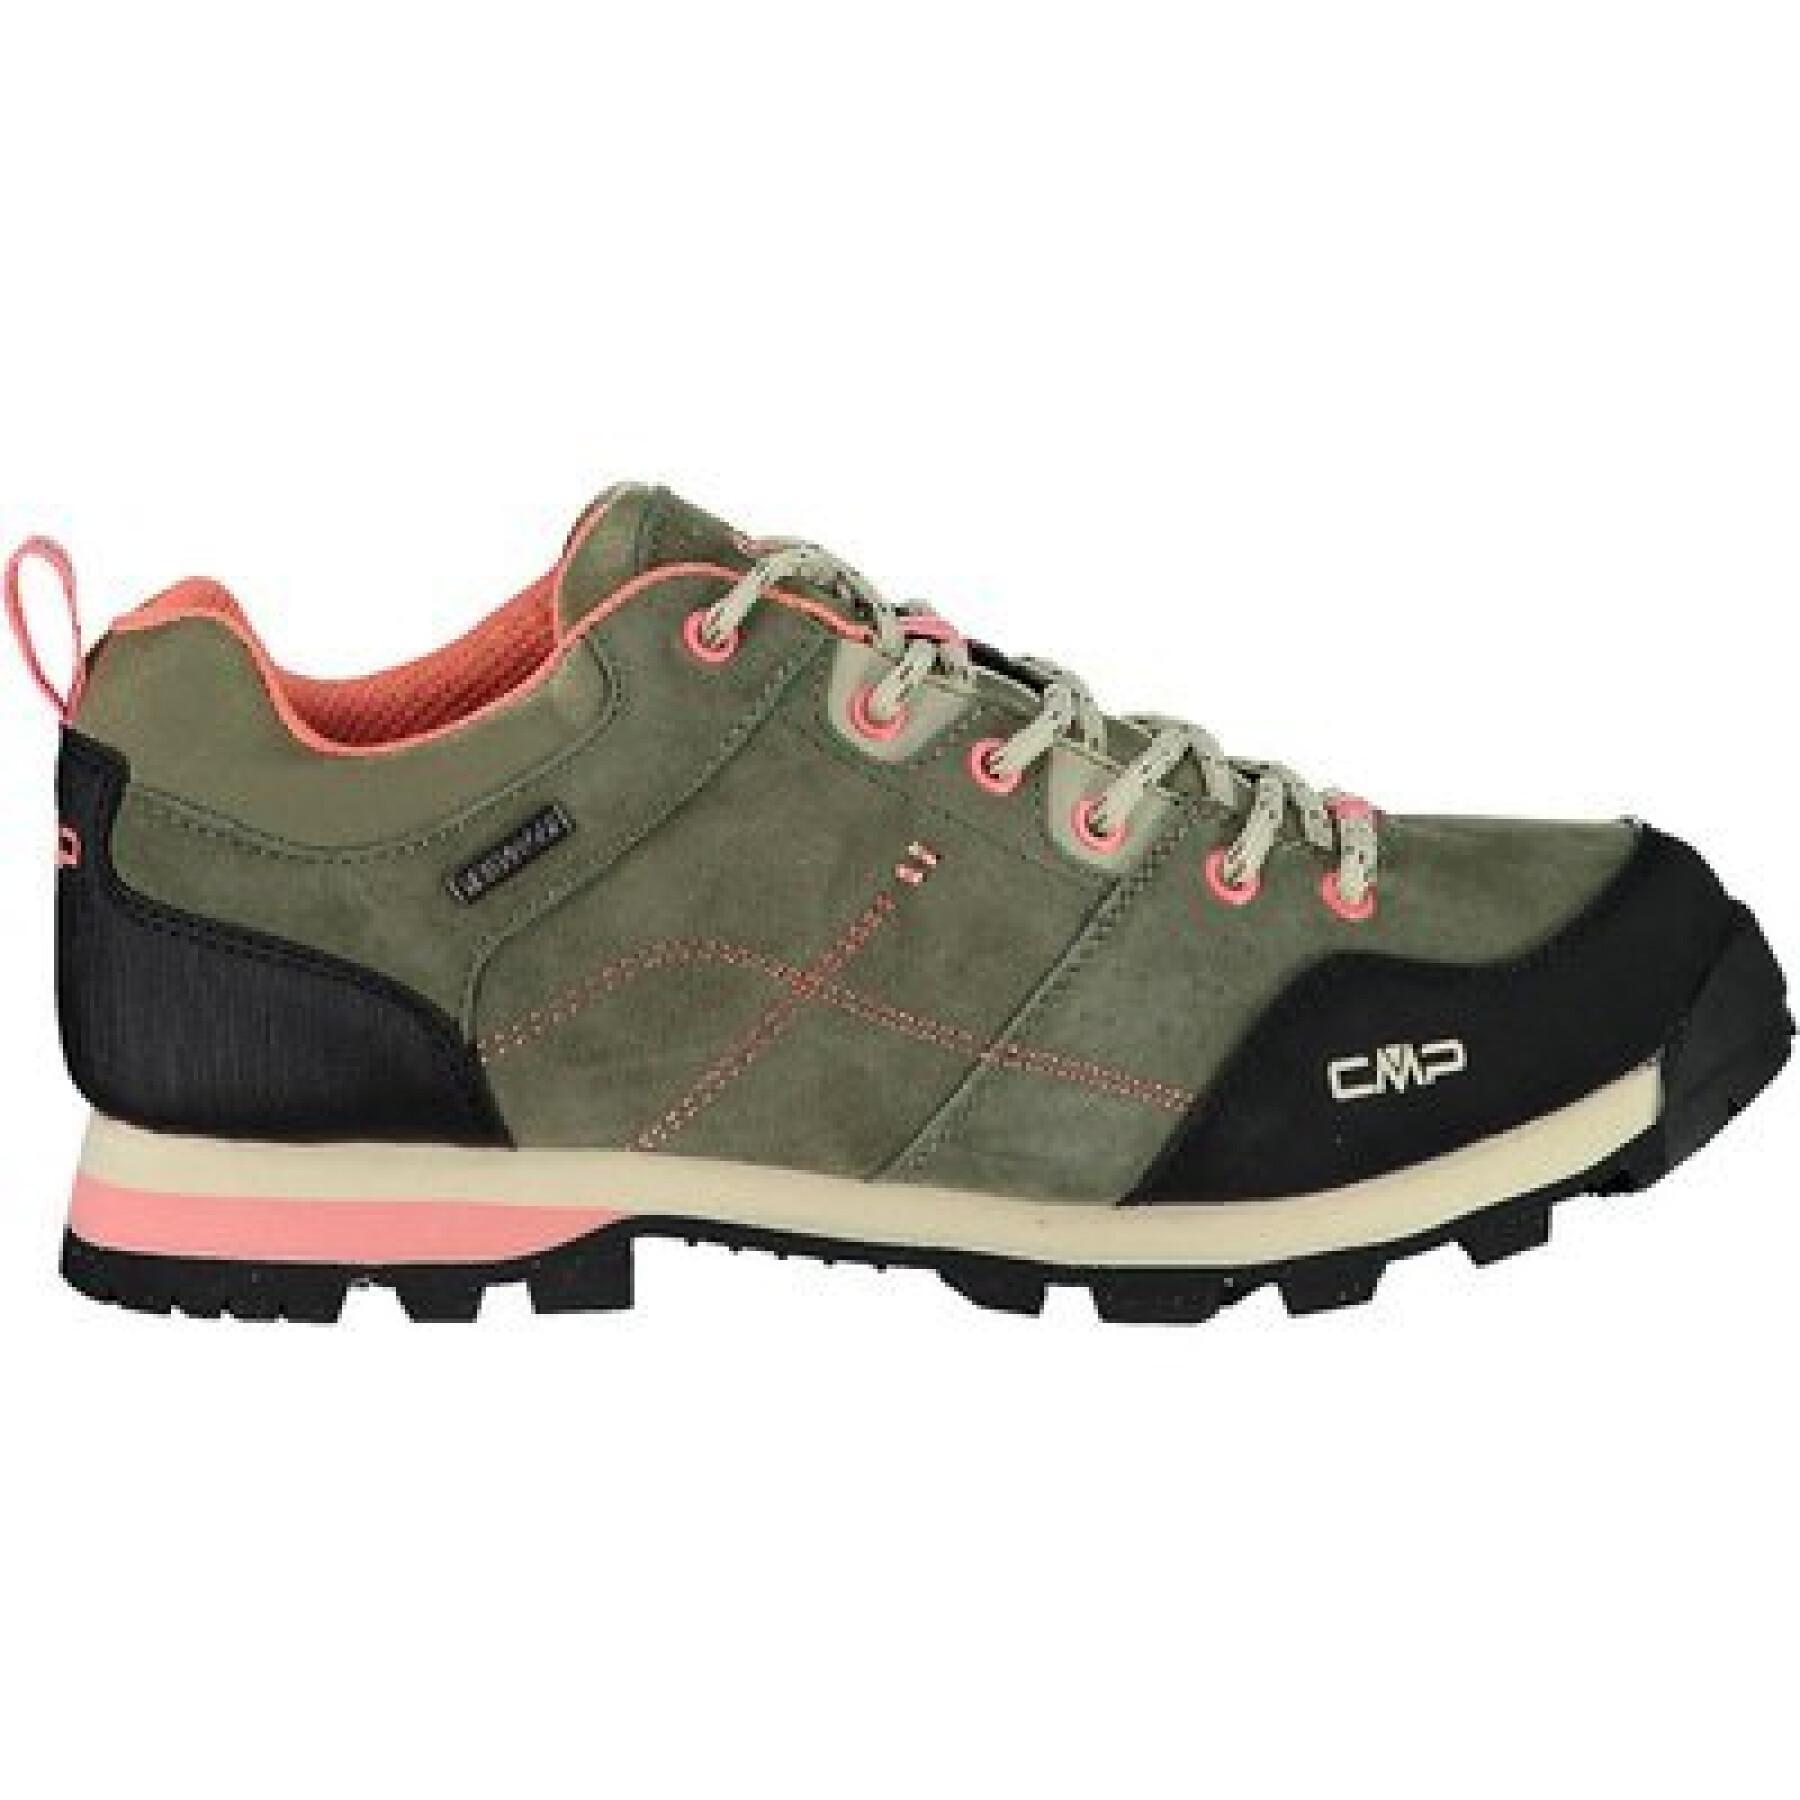 Low hiking shoes for women CMP Alcor